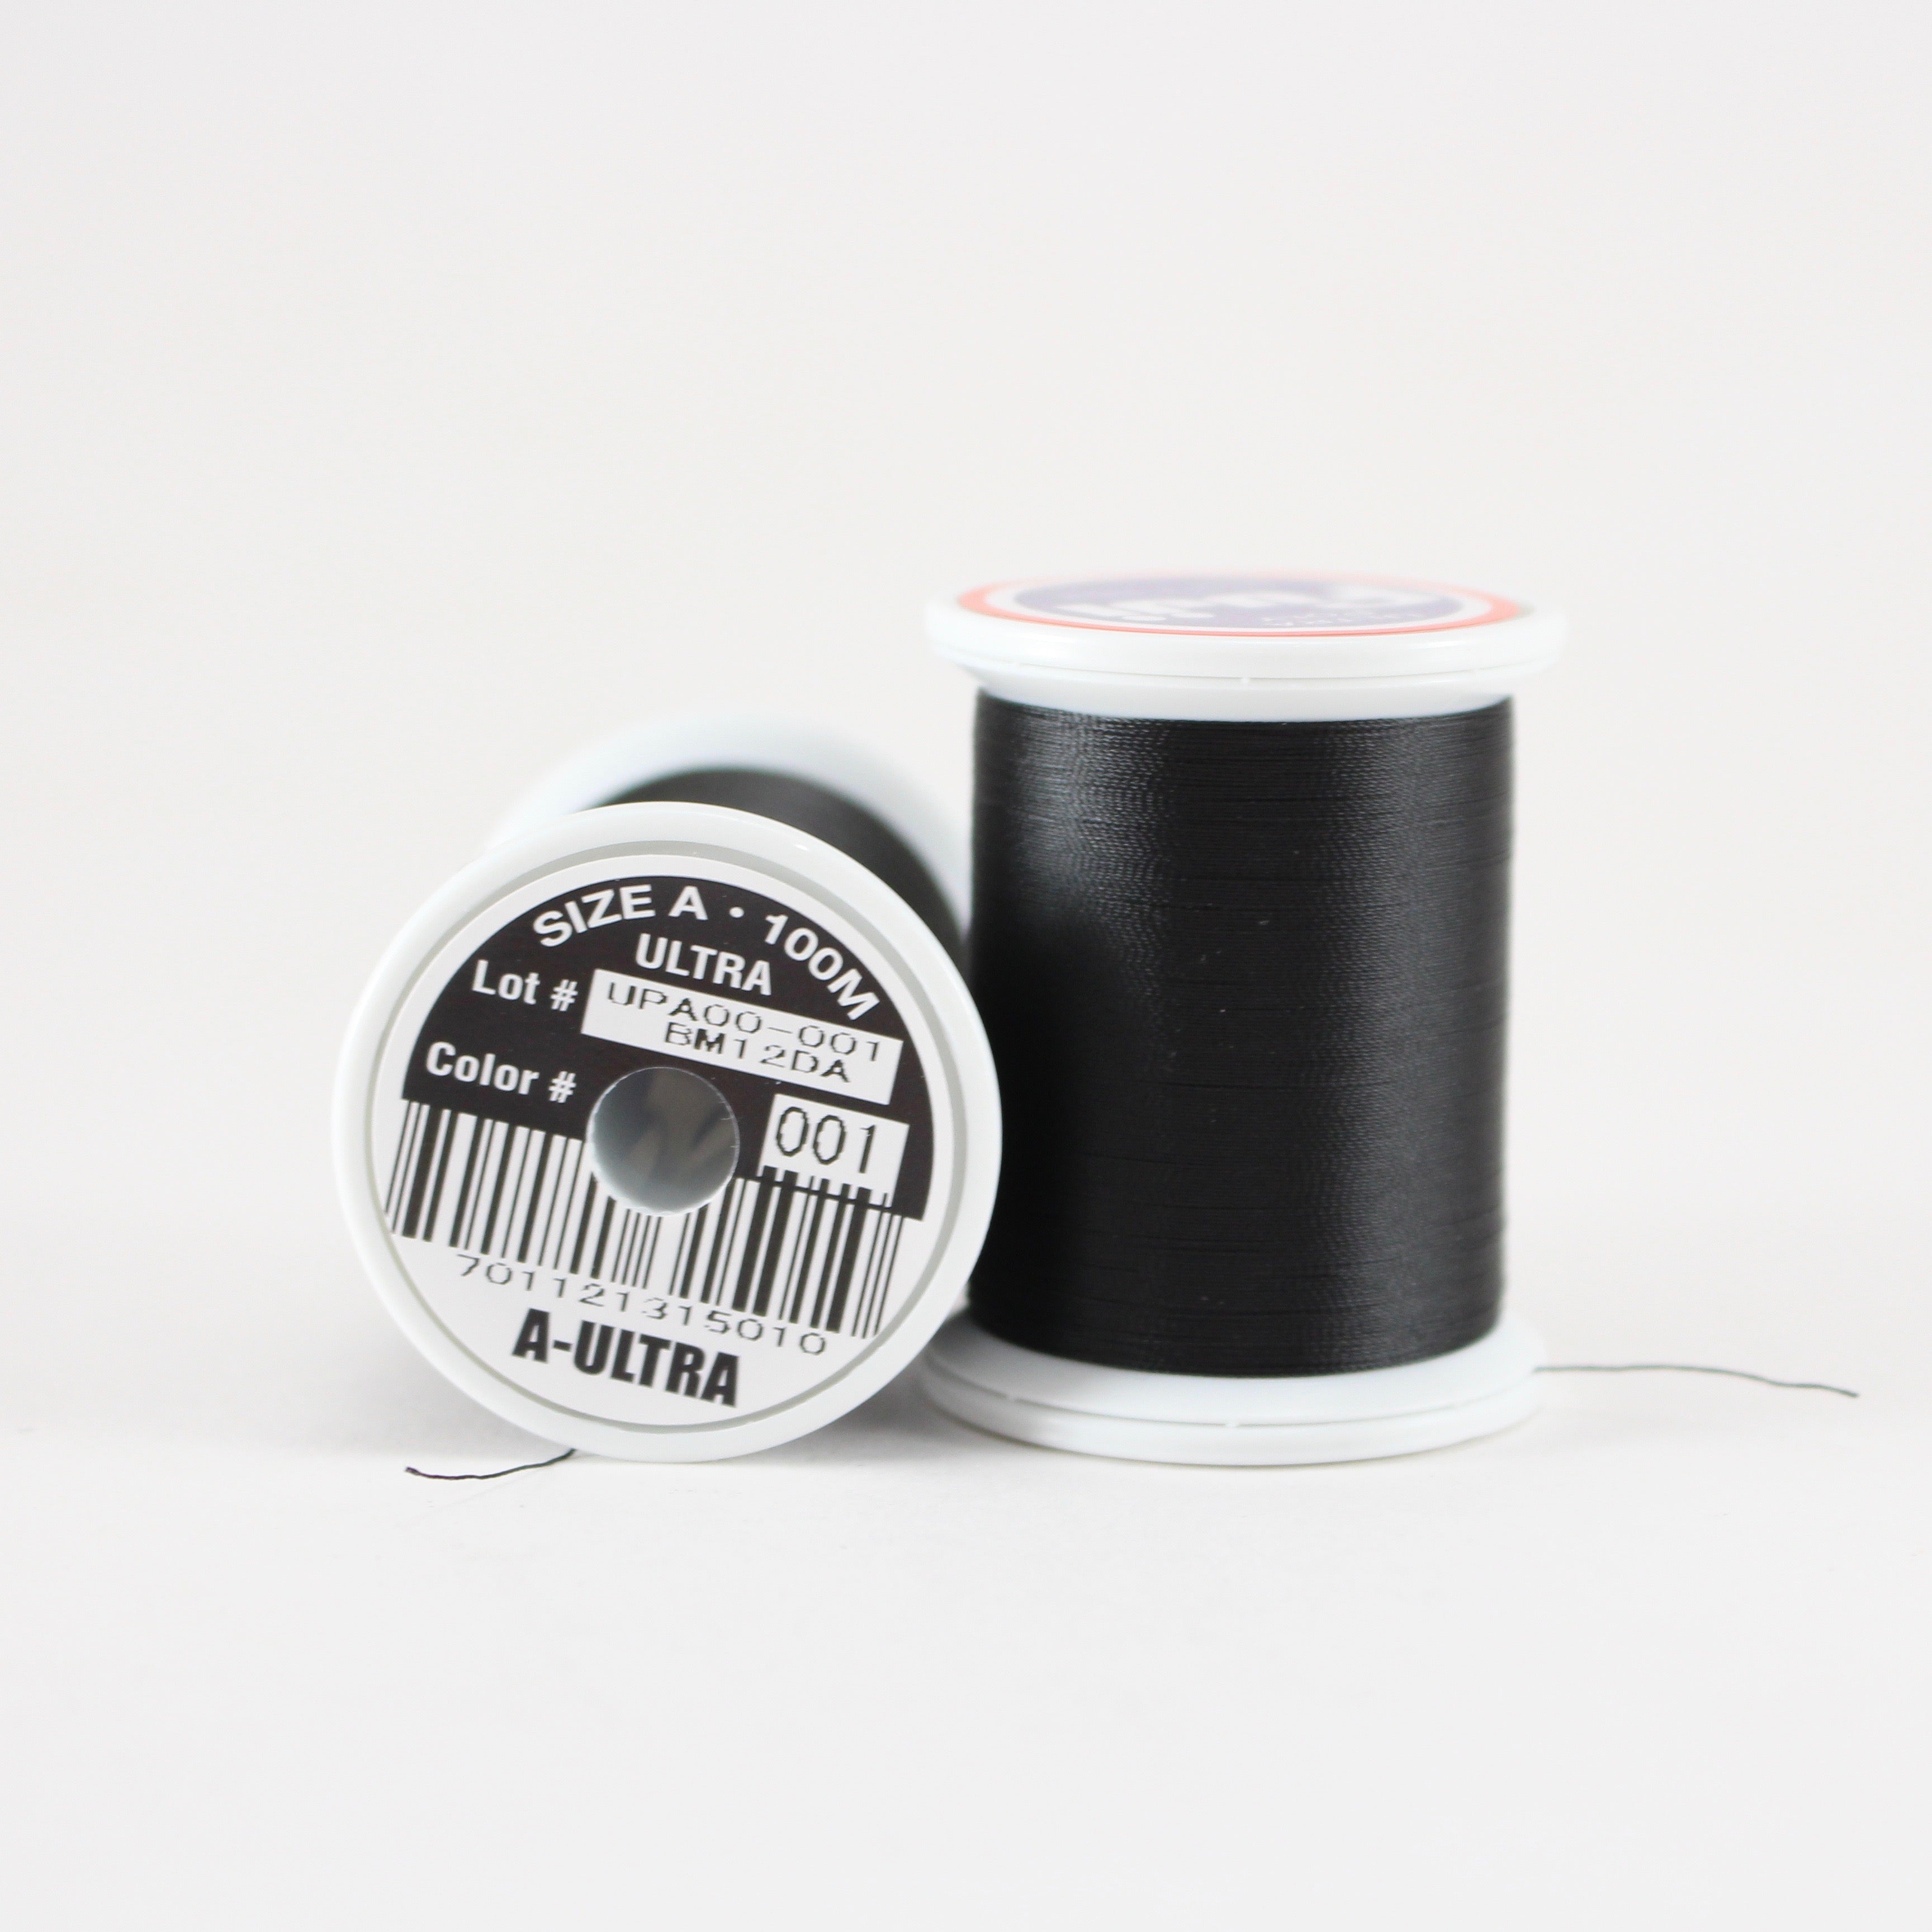 Fuji Ultra Poly rod wrapping thread in Black #001 (Size A 100m spool) –  Proof Fly Fishing